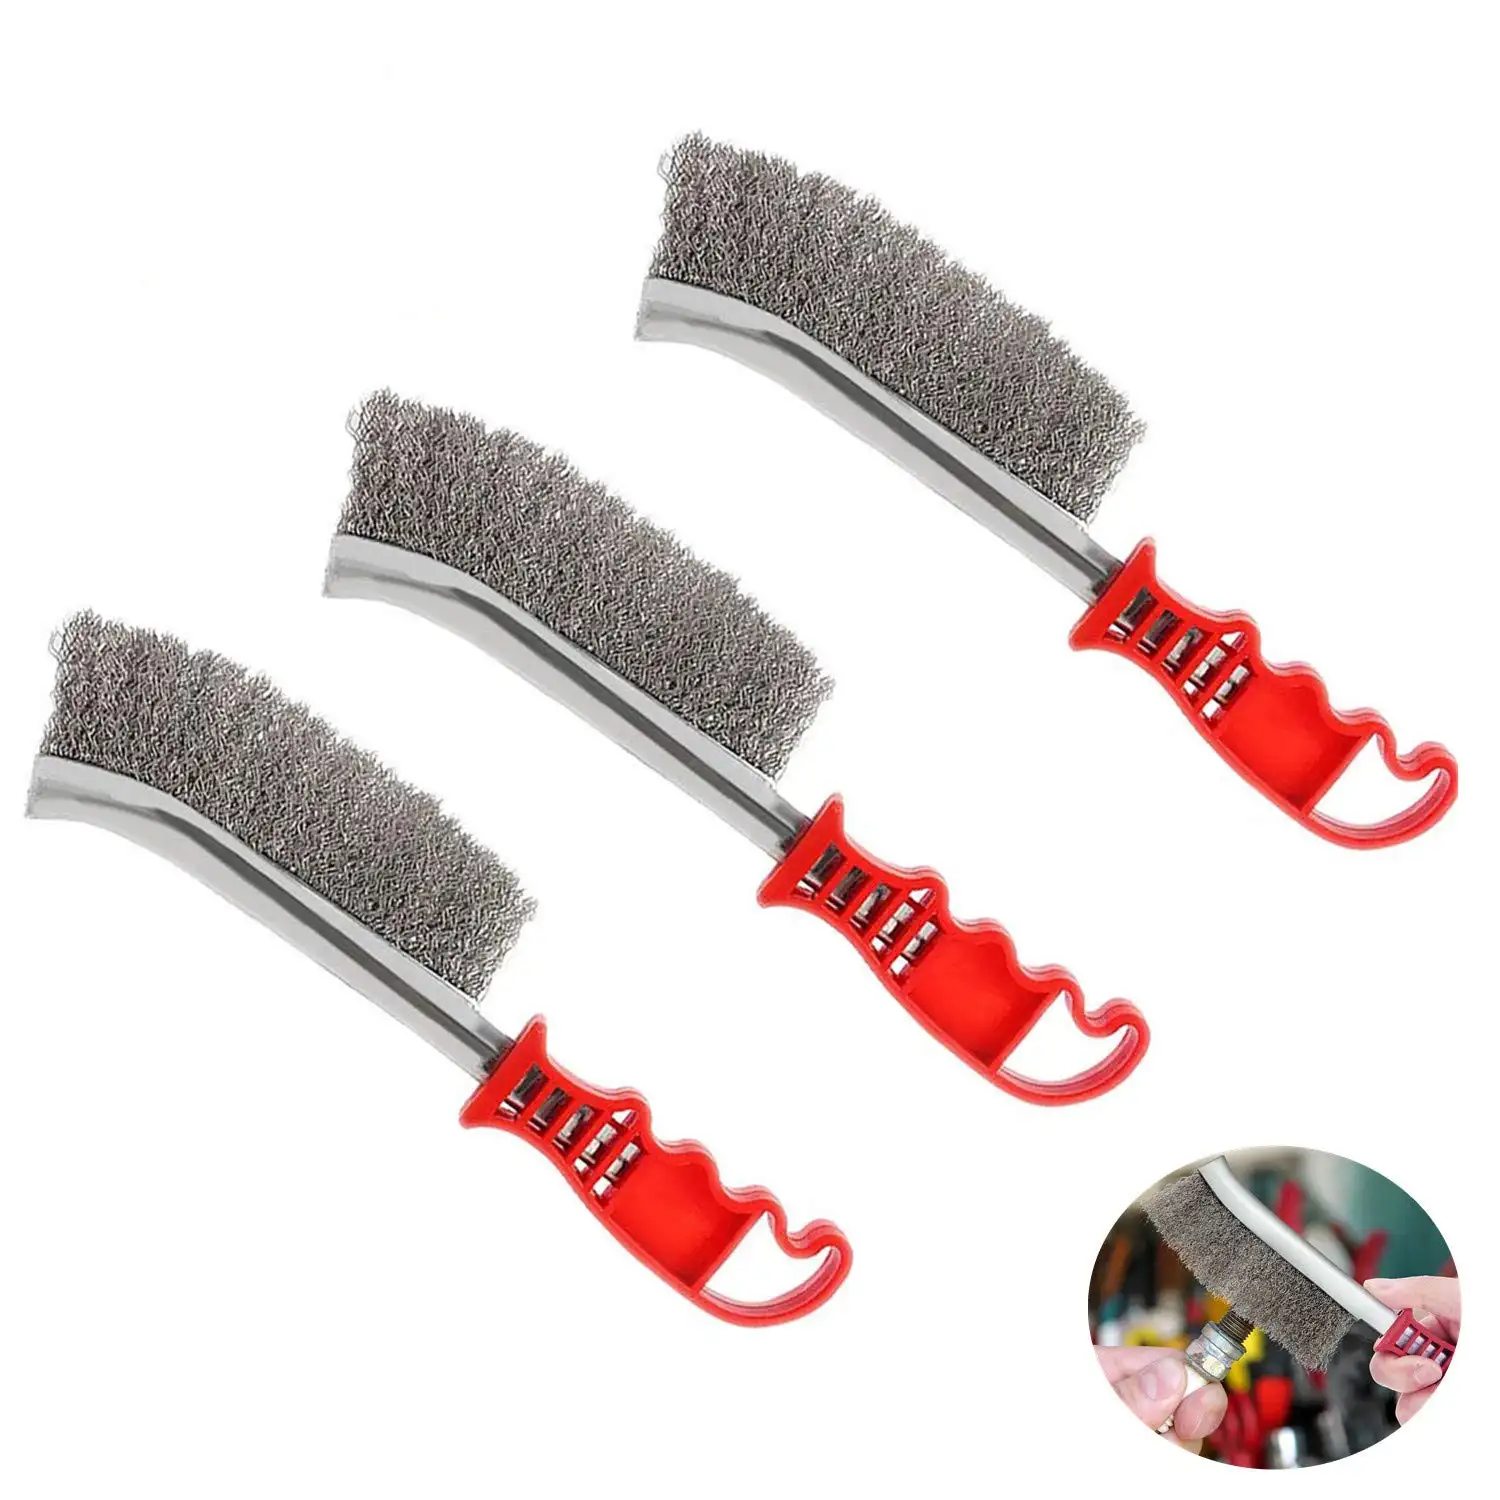 Stainless steel wire rust removal small wire brush Cleaning welding slag rust dust red plastic curved Handle wire brush